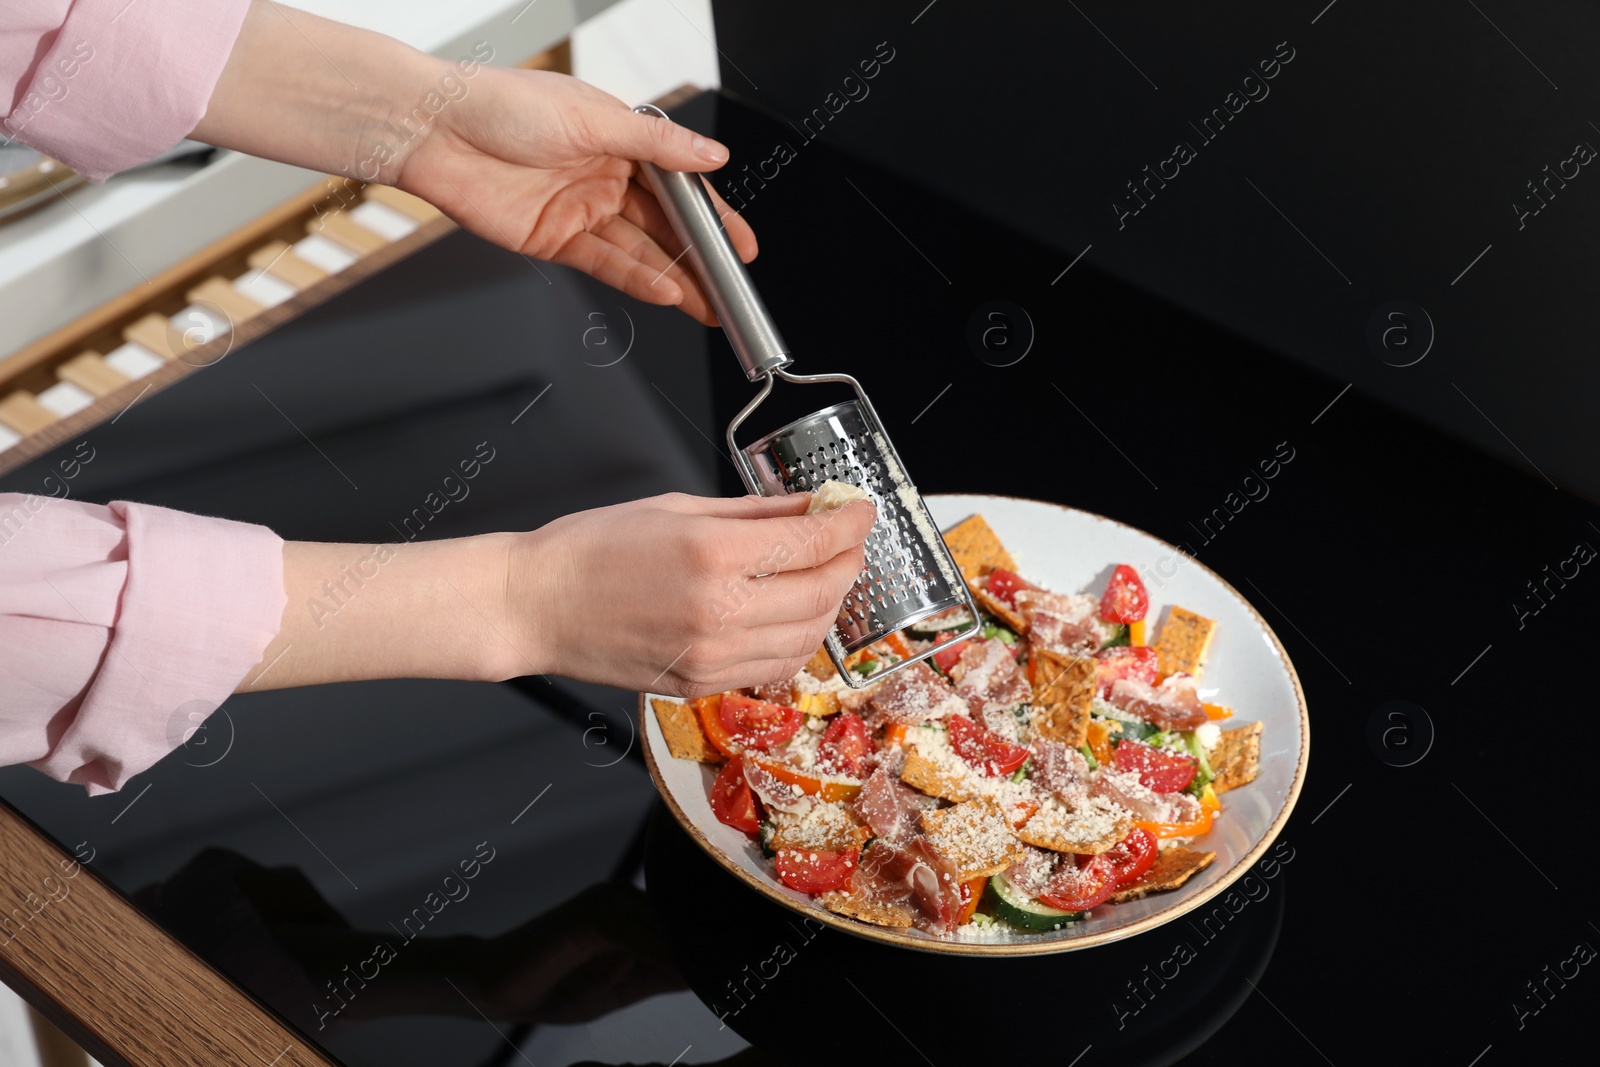 Photo of Food stylist grating cheese onto salad with prosciutto at black table in photo studio, closeup